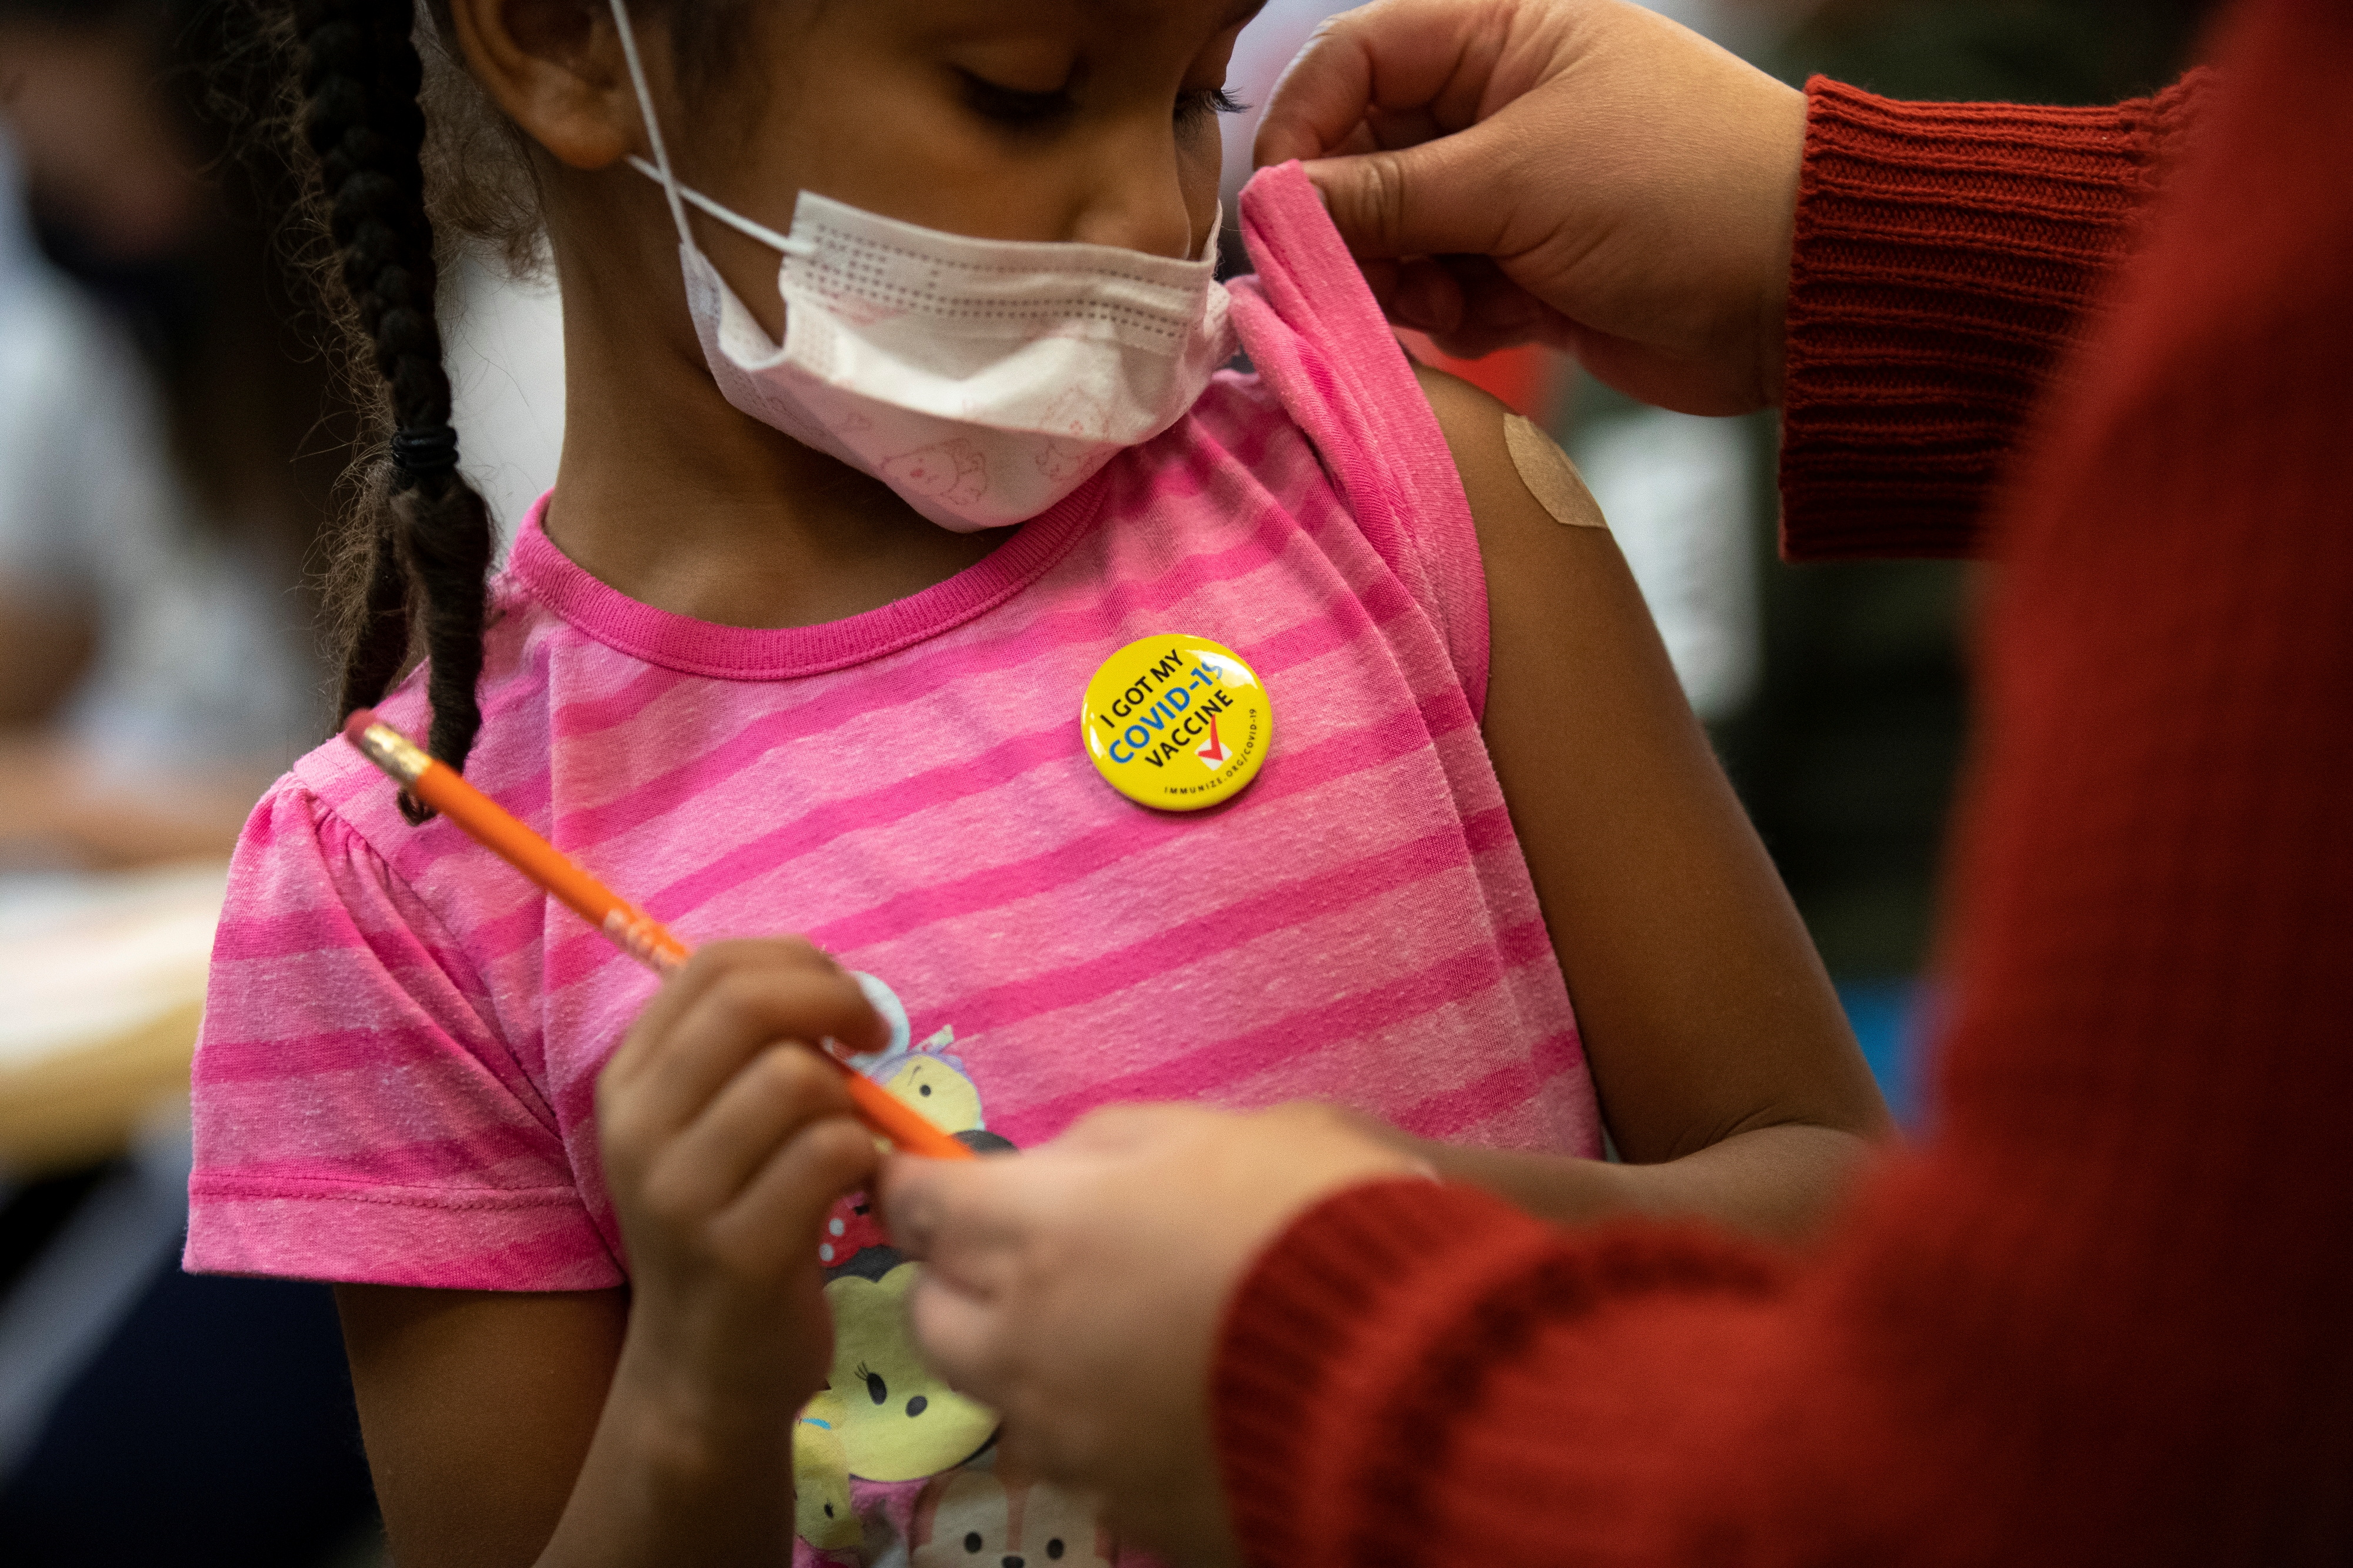 Josclyn Ledisma, 5, examines a band-aid after receiving her first dose of the vaccine against the coronavirus disease (COVID-19) inside Mary's Center in Washington, U.S., November 3, 2021. REUTERS/Tom Brenner